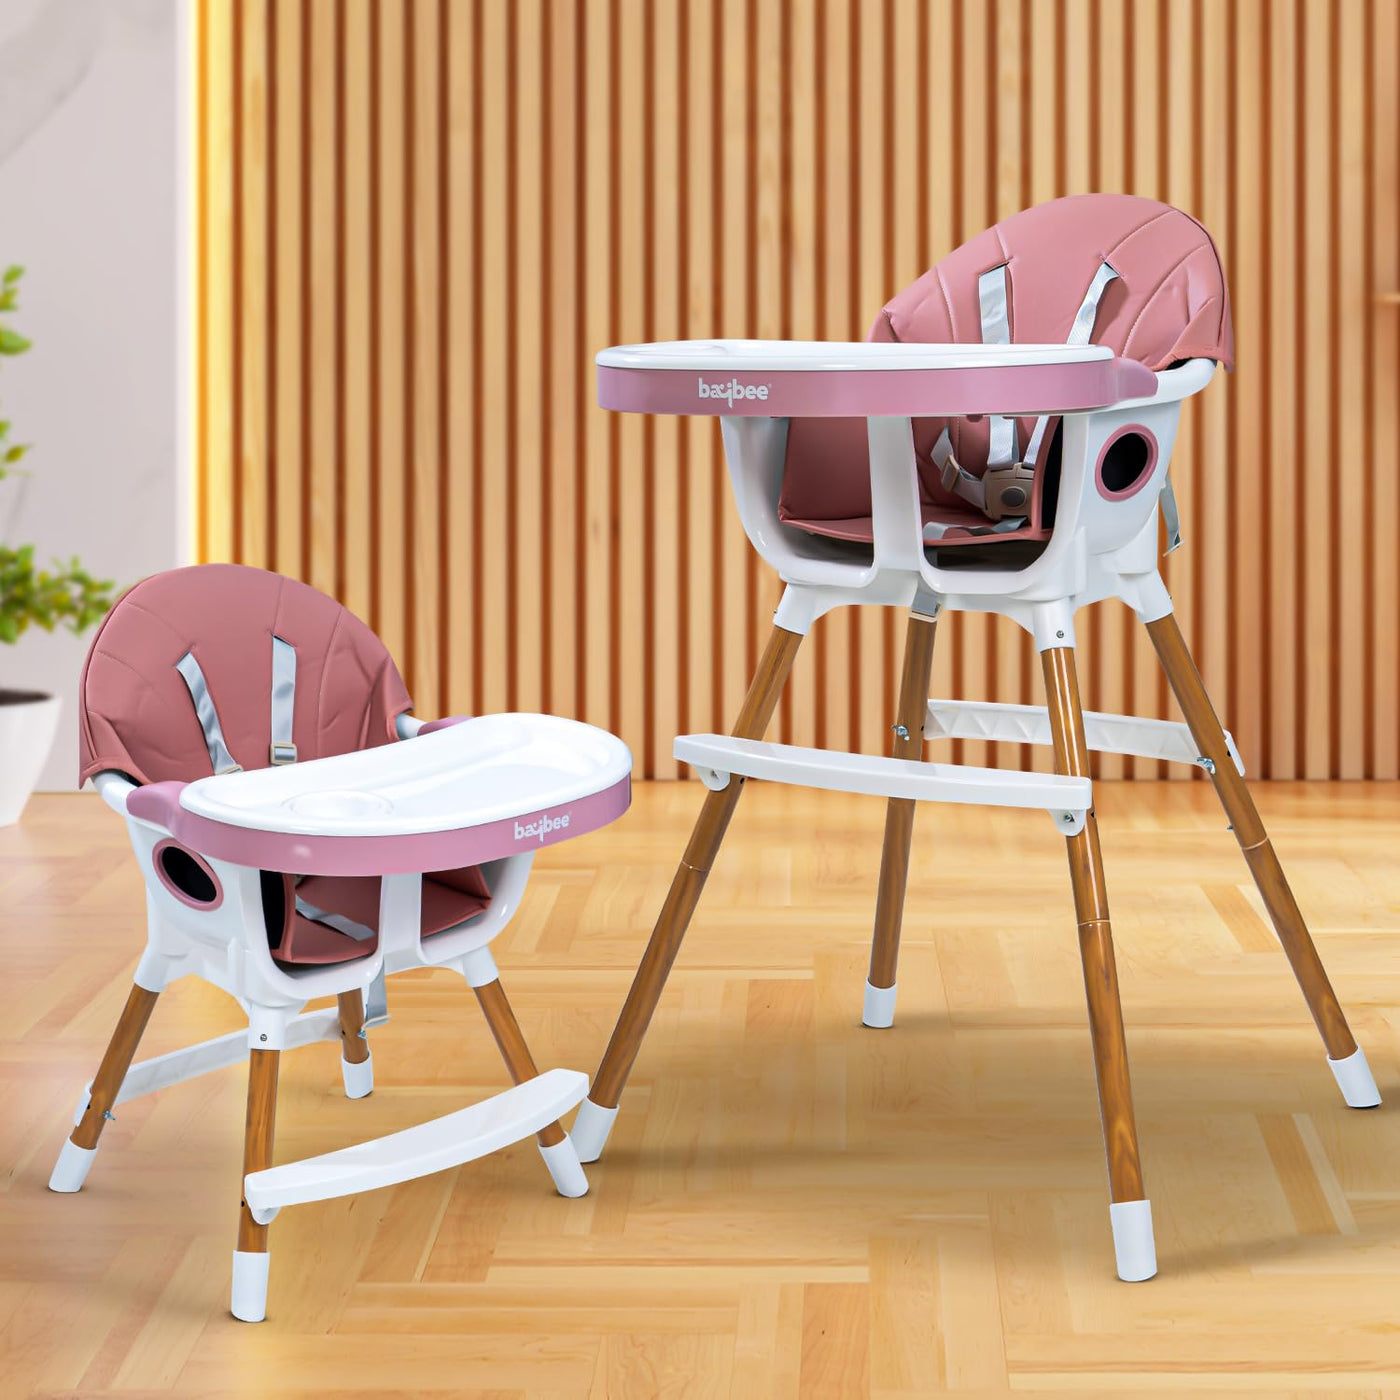 What Is A Good High Chair To Buy